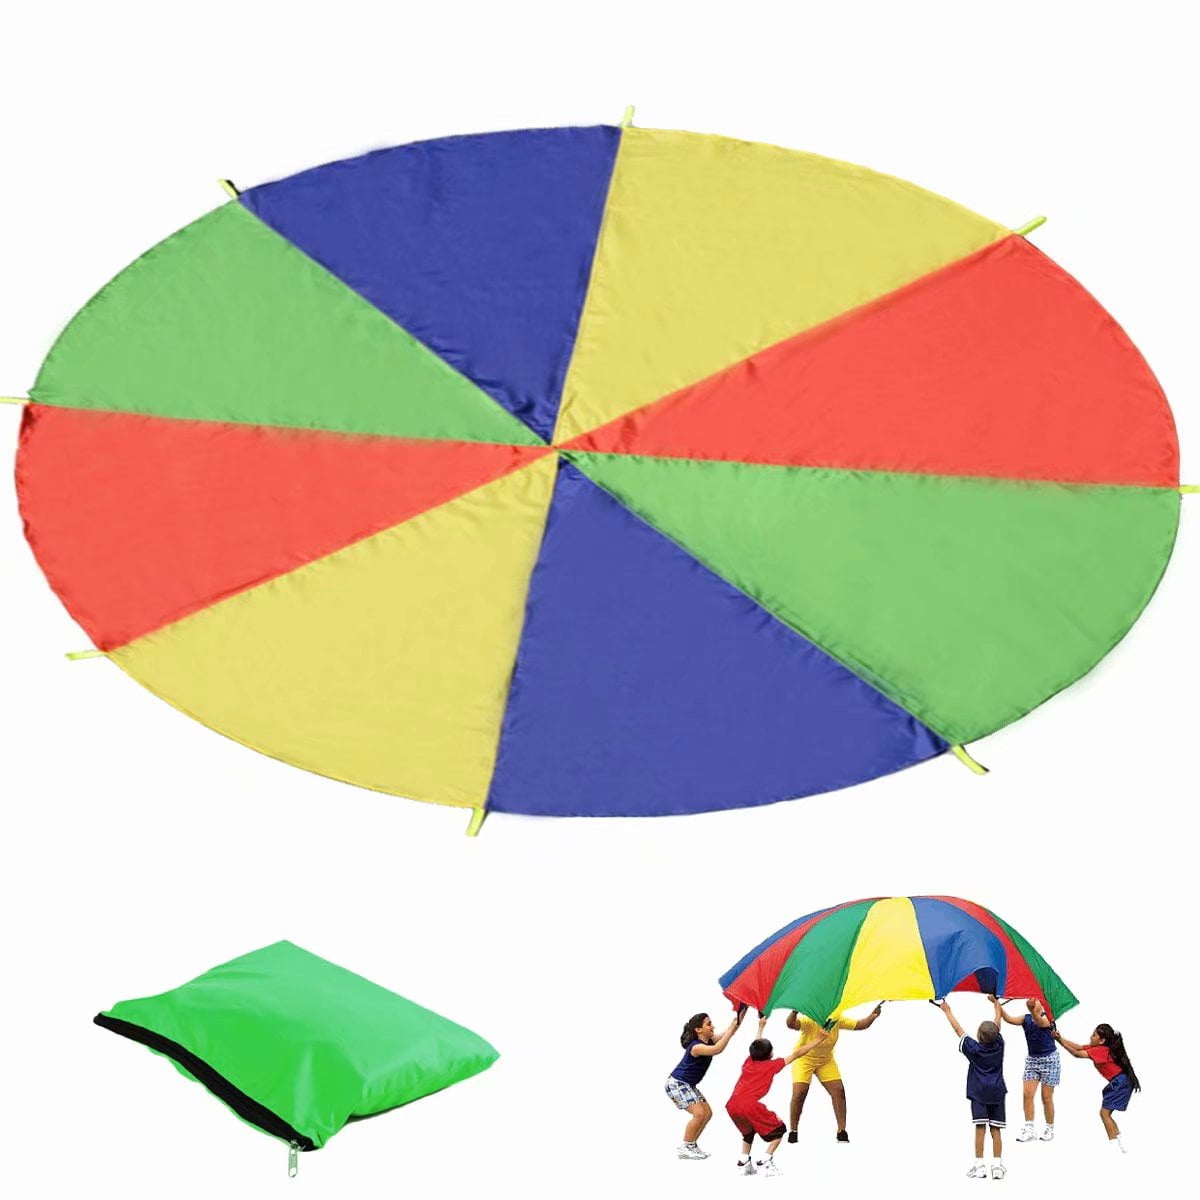 L Gimilife 9ft Parachute for Kids Play Parachute 8 Handles,Multicolored Parachute Toy Indoor,Outdoor Kids Parachute Cooperative Games for Girl Boy Toddlers Birthday Gift 